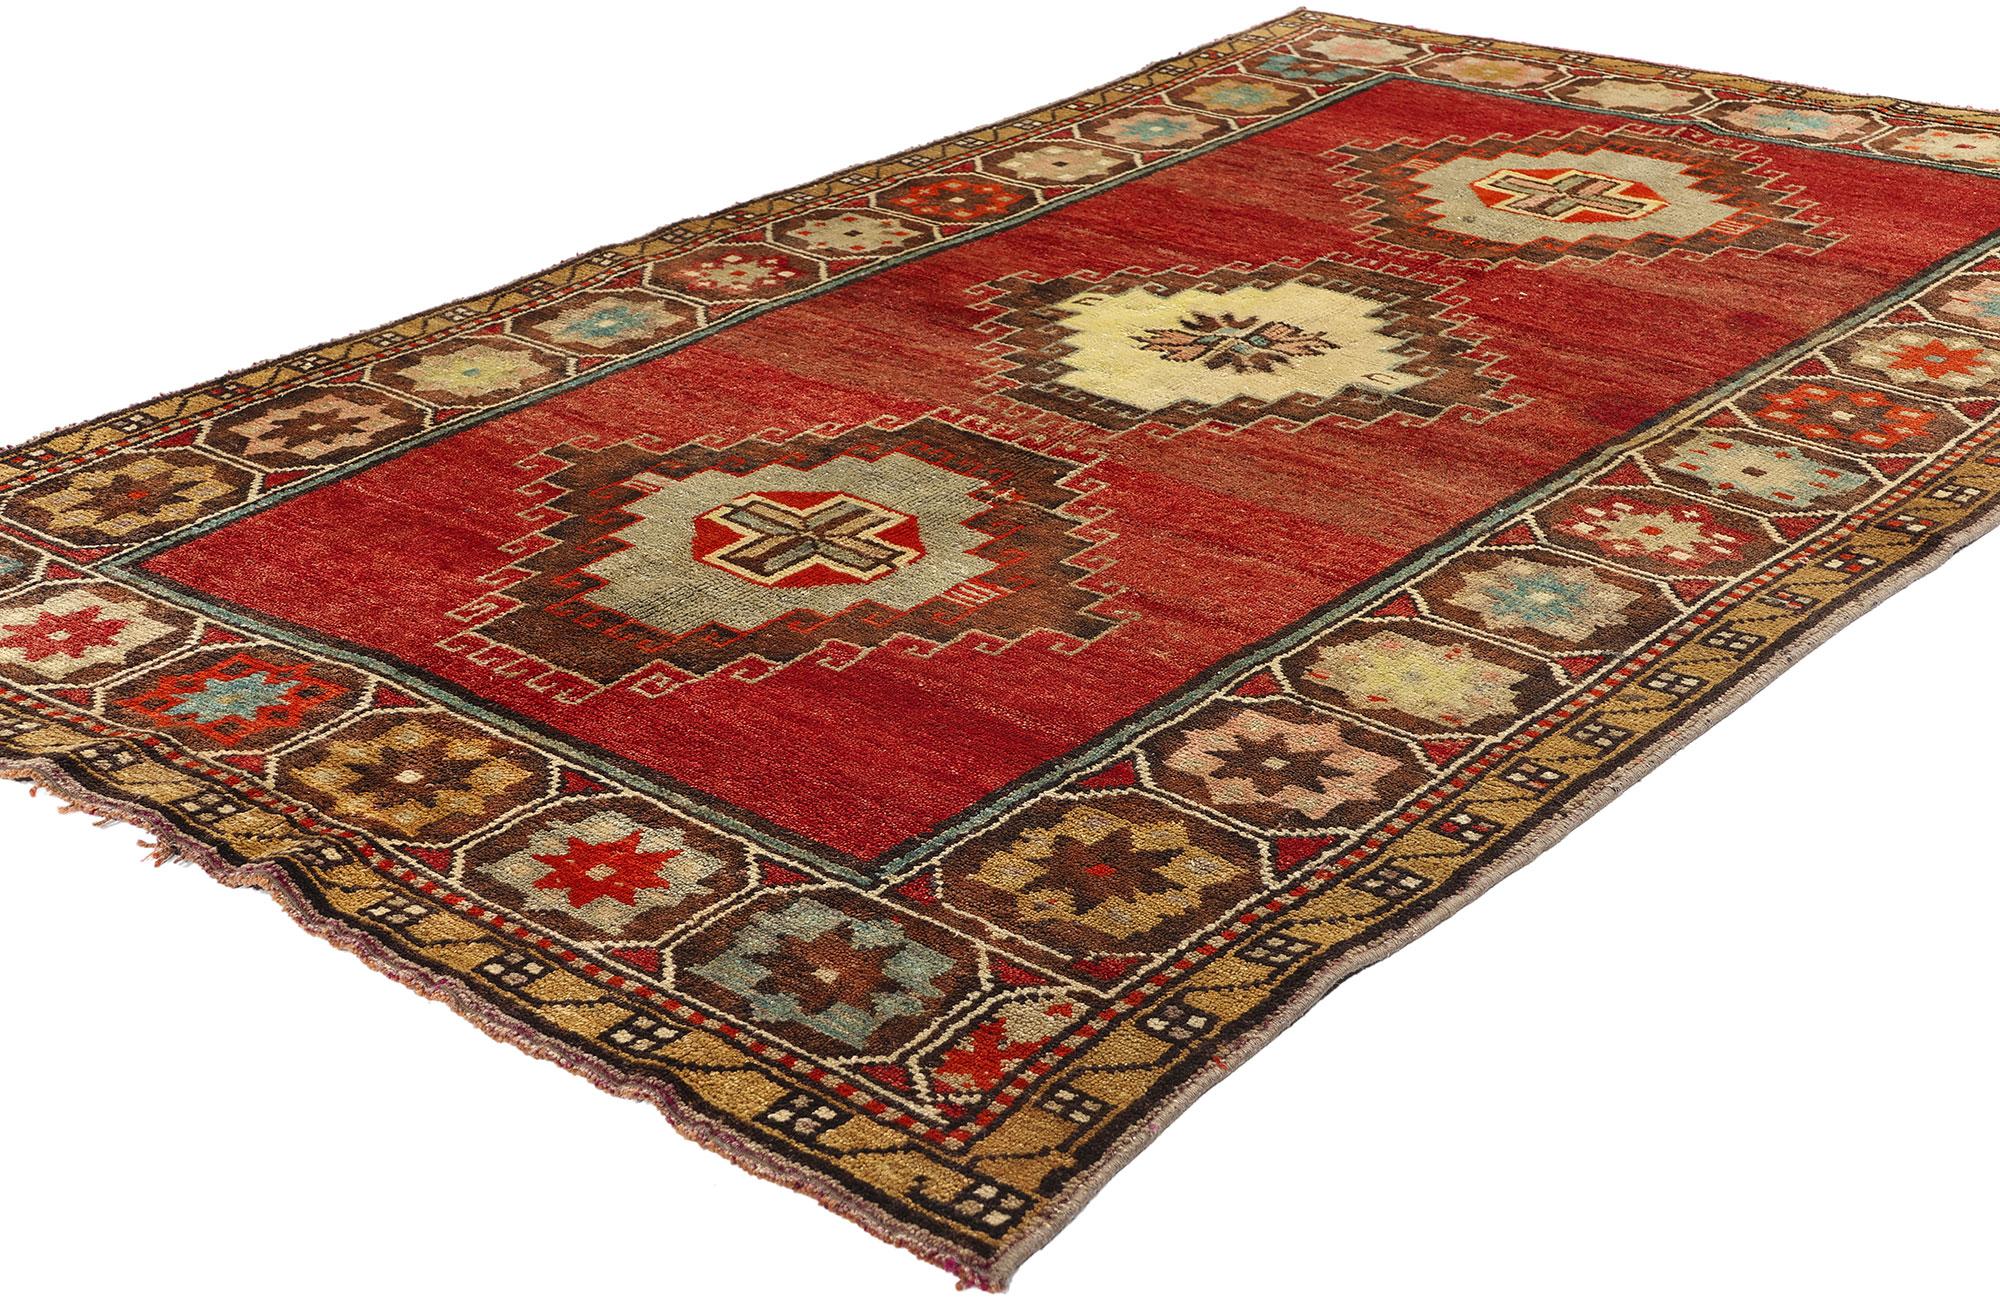 52293 Vintage Turkish Oushak Rug, 04'03 x 06'10. Turkish Oushak rugs, originating from the Western region of Oushak in Turkey, are renowned for their intricate designs, serene color palettes, and luxurious wool materials. Dating back to the Ottoman